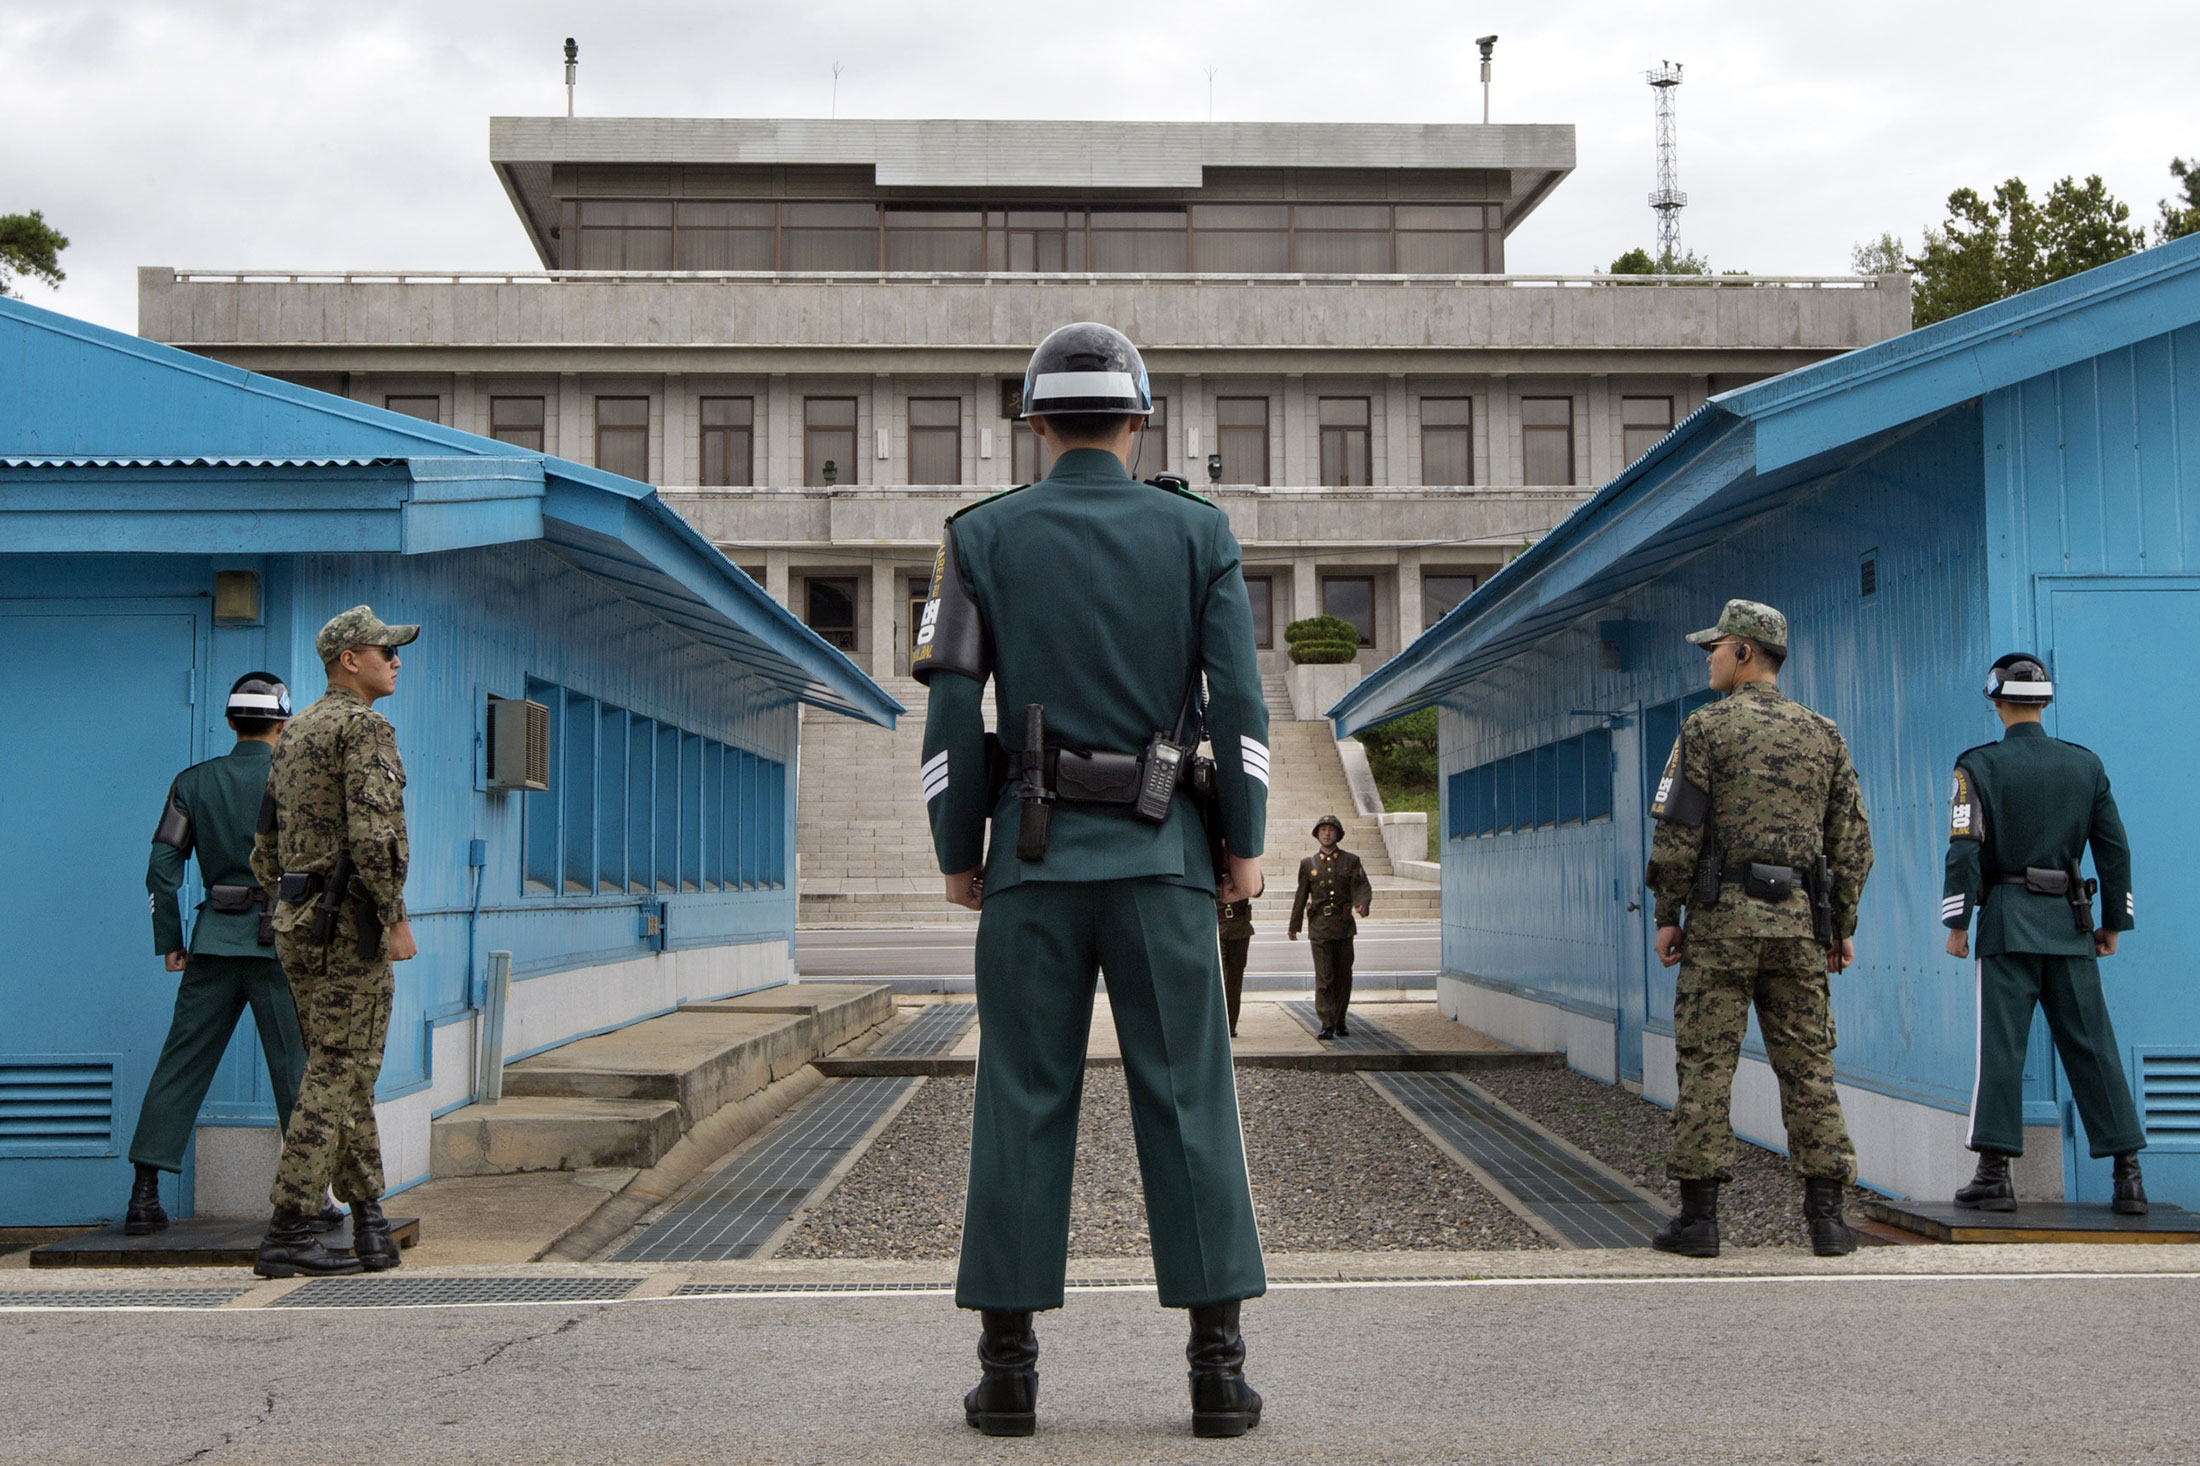 South Korea Fires Warning Shots Over Border as Tensions Rise